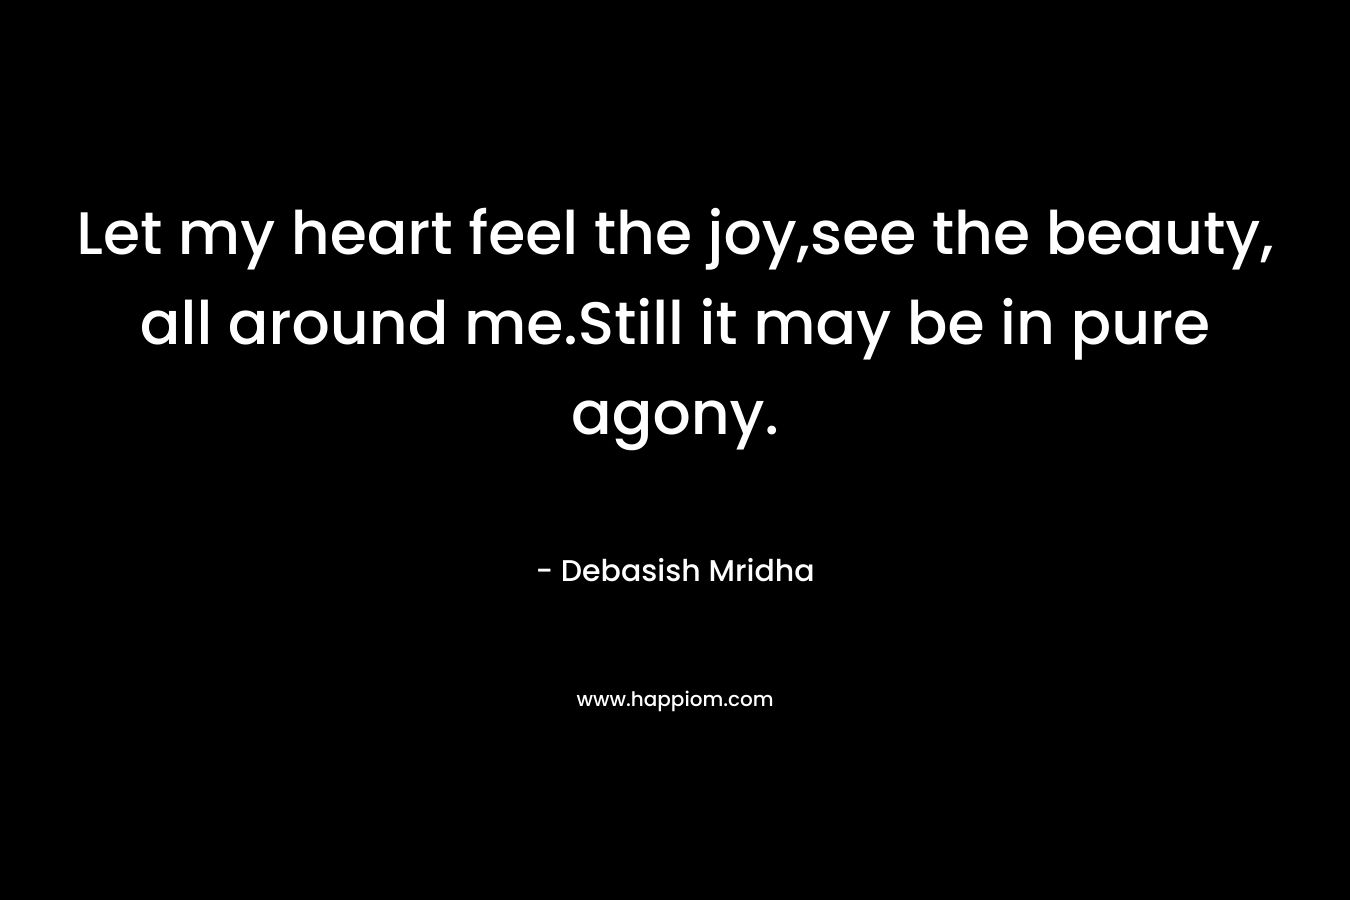 Let my heart feel the joy,see the beauty, all around me.Still it may be in pure agony. – Debasish Mridha